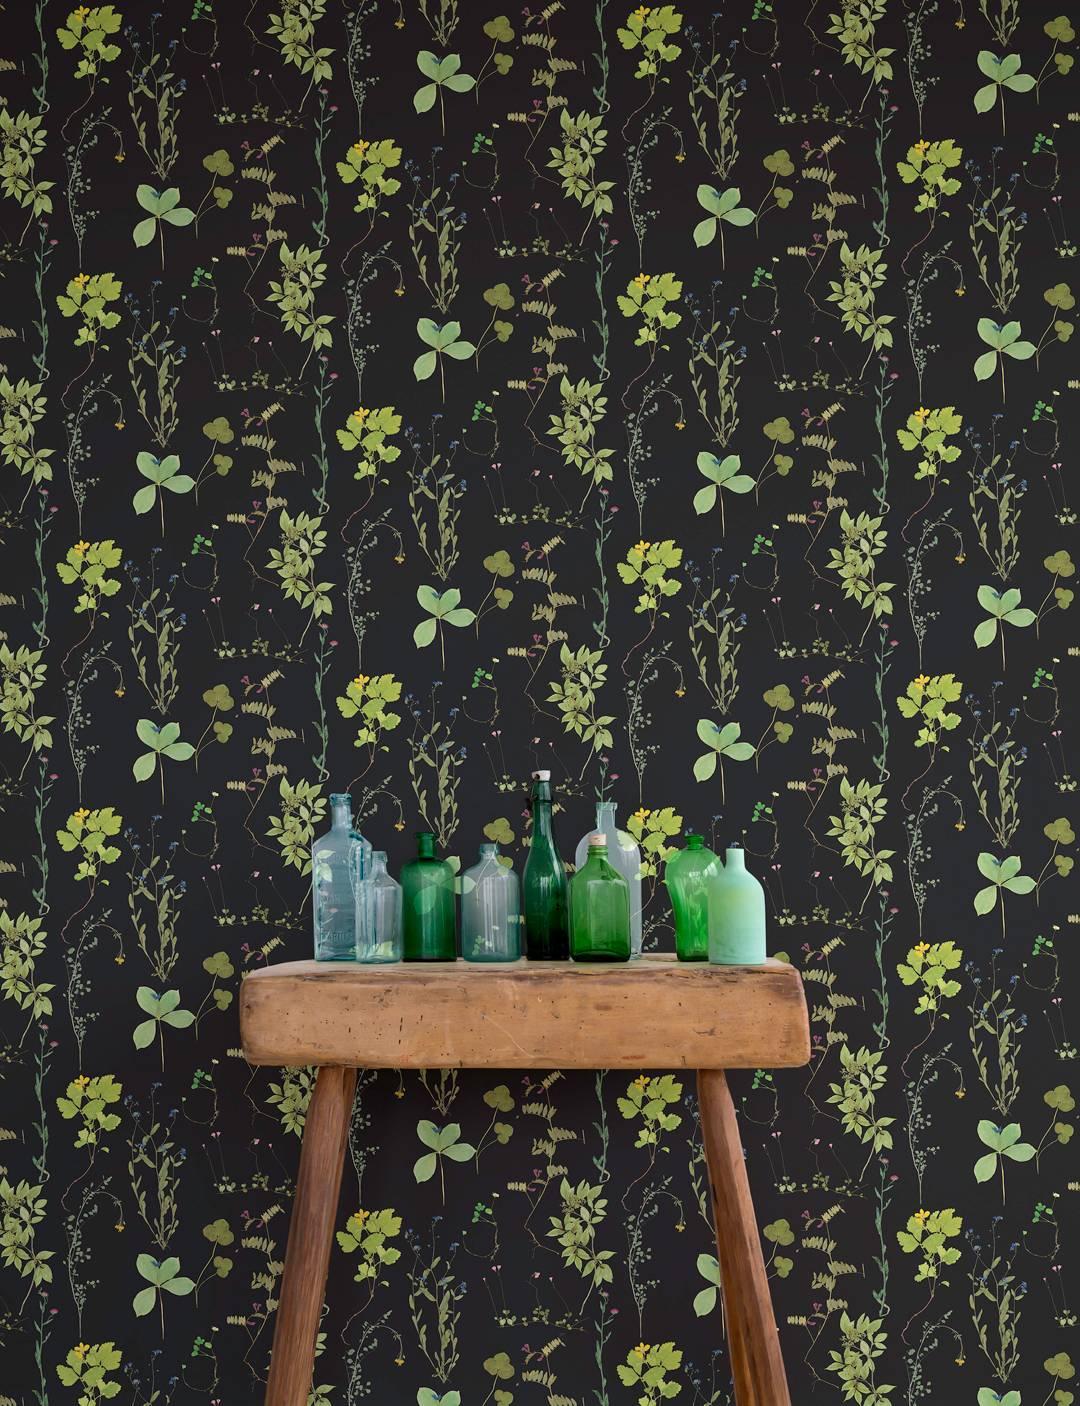 Founder of Ivana Helsinki, Paola Suhonen pressed flowers in a book, creating Herbario years later. Aimée worked with these elements to create a myriad of colorful wallpapers and fabrics to use in the home. 

Samples are available for $18 including